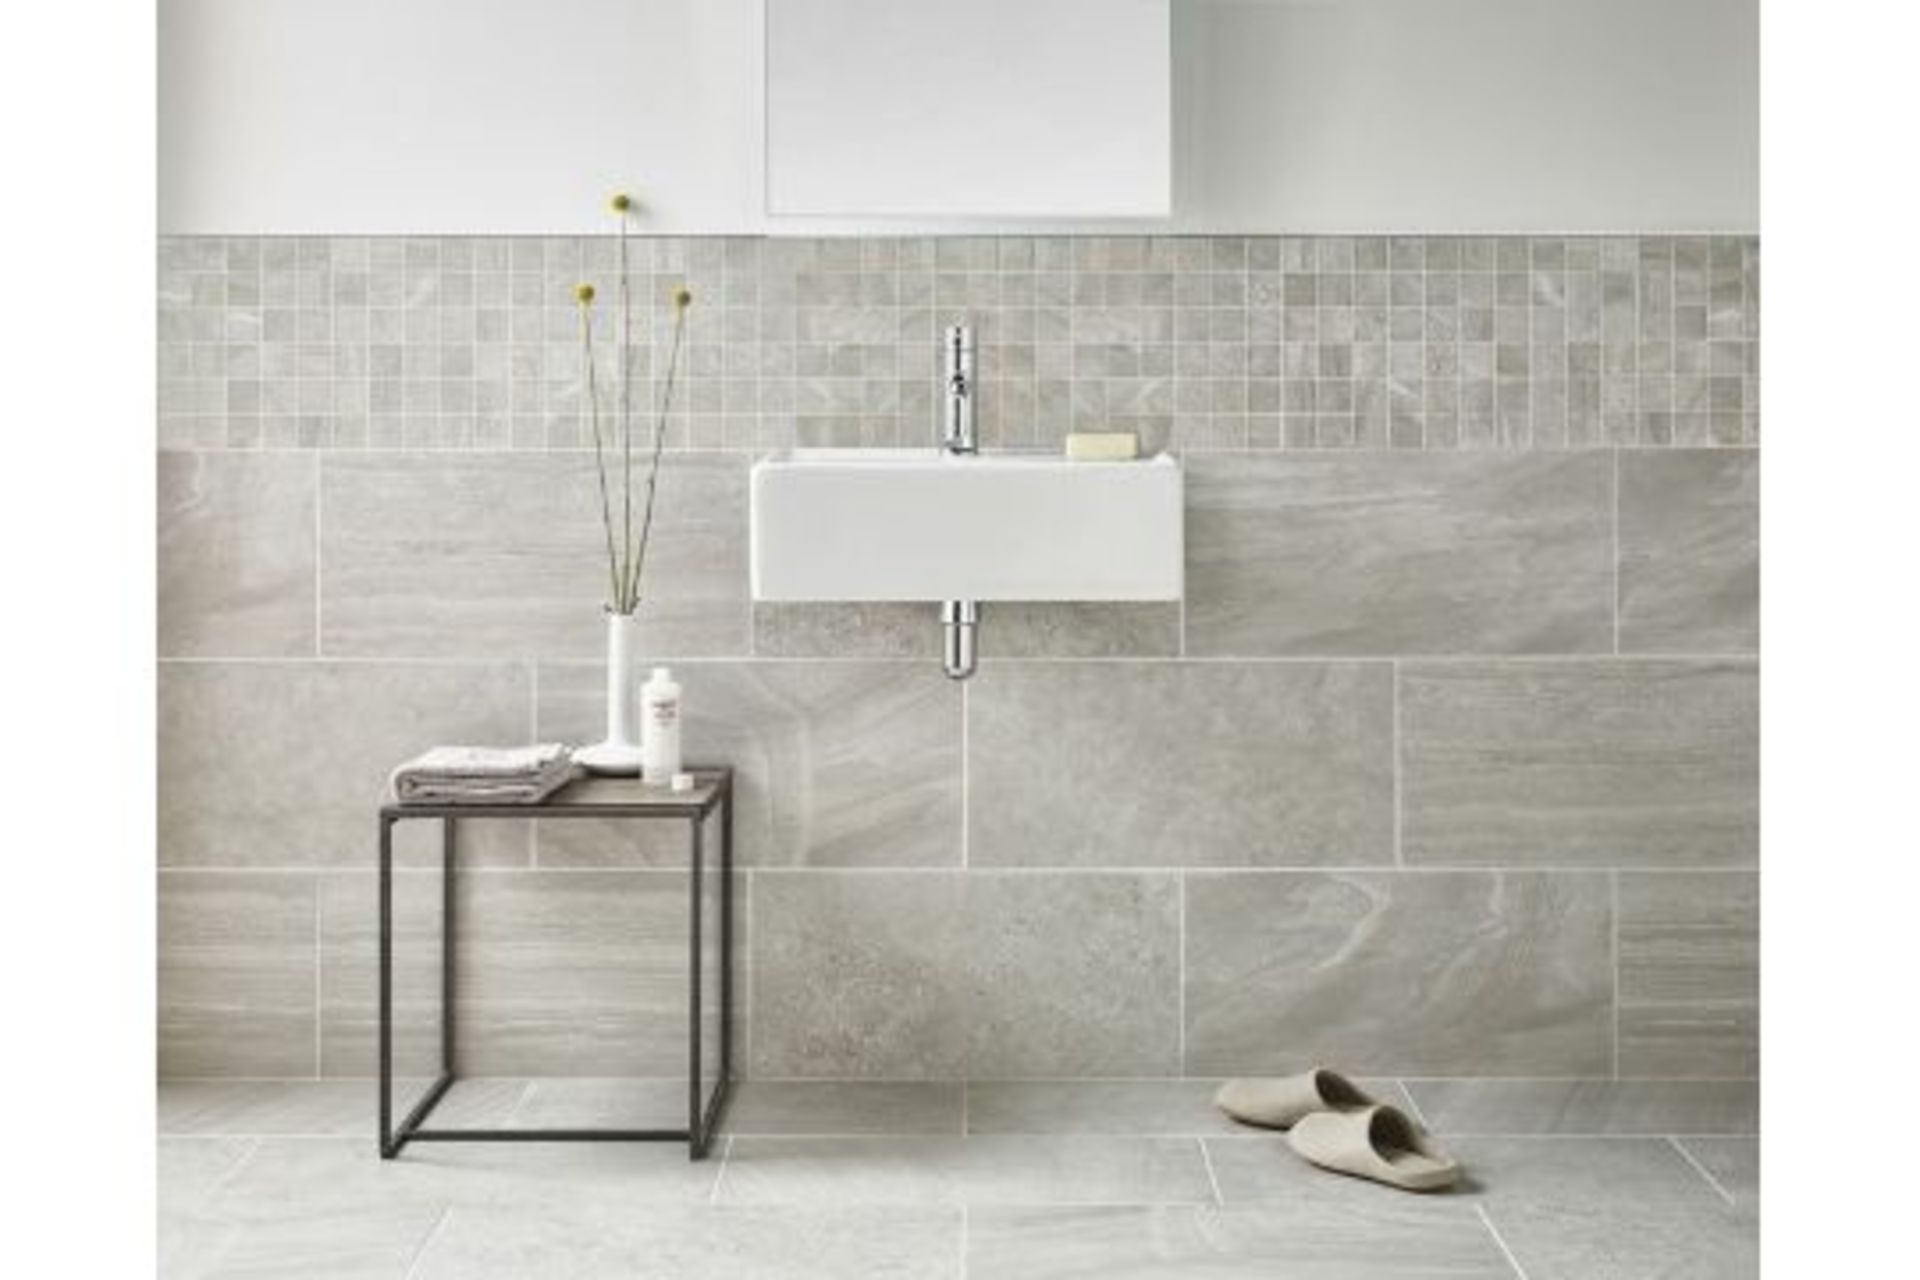 NEW 8.4 Square Meters of Bloomsbury Brook Edge Lapatto Rock Wall and Floor Tiles. 300x600mm pe...